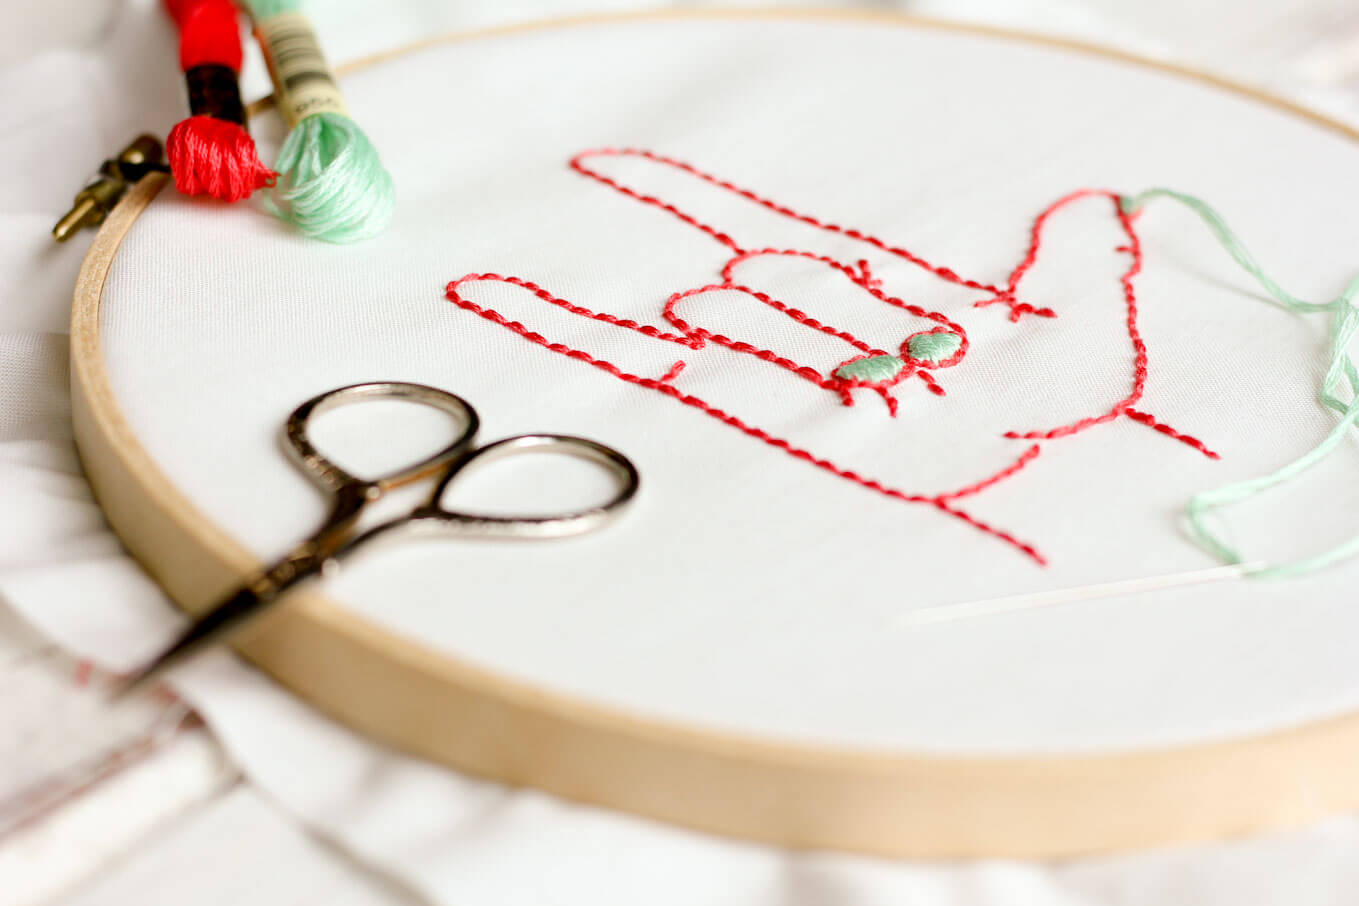 Embroidery For Beginners Free Patterns I Love You Free Embroidery Pattern Make Do Crew